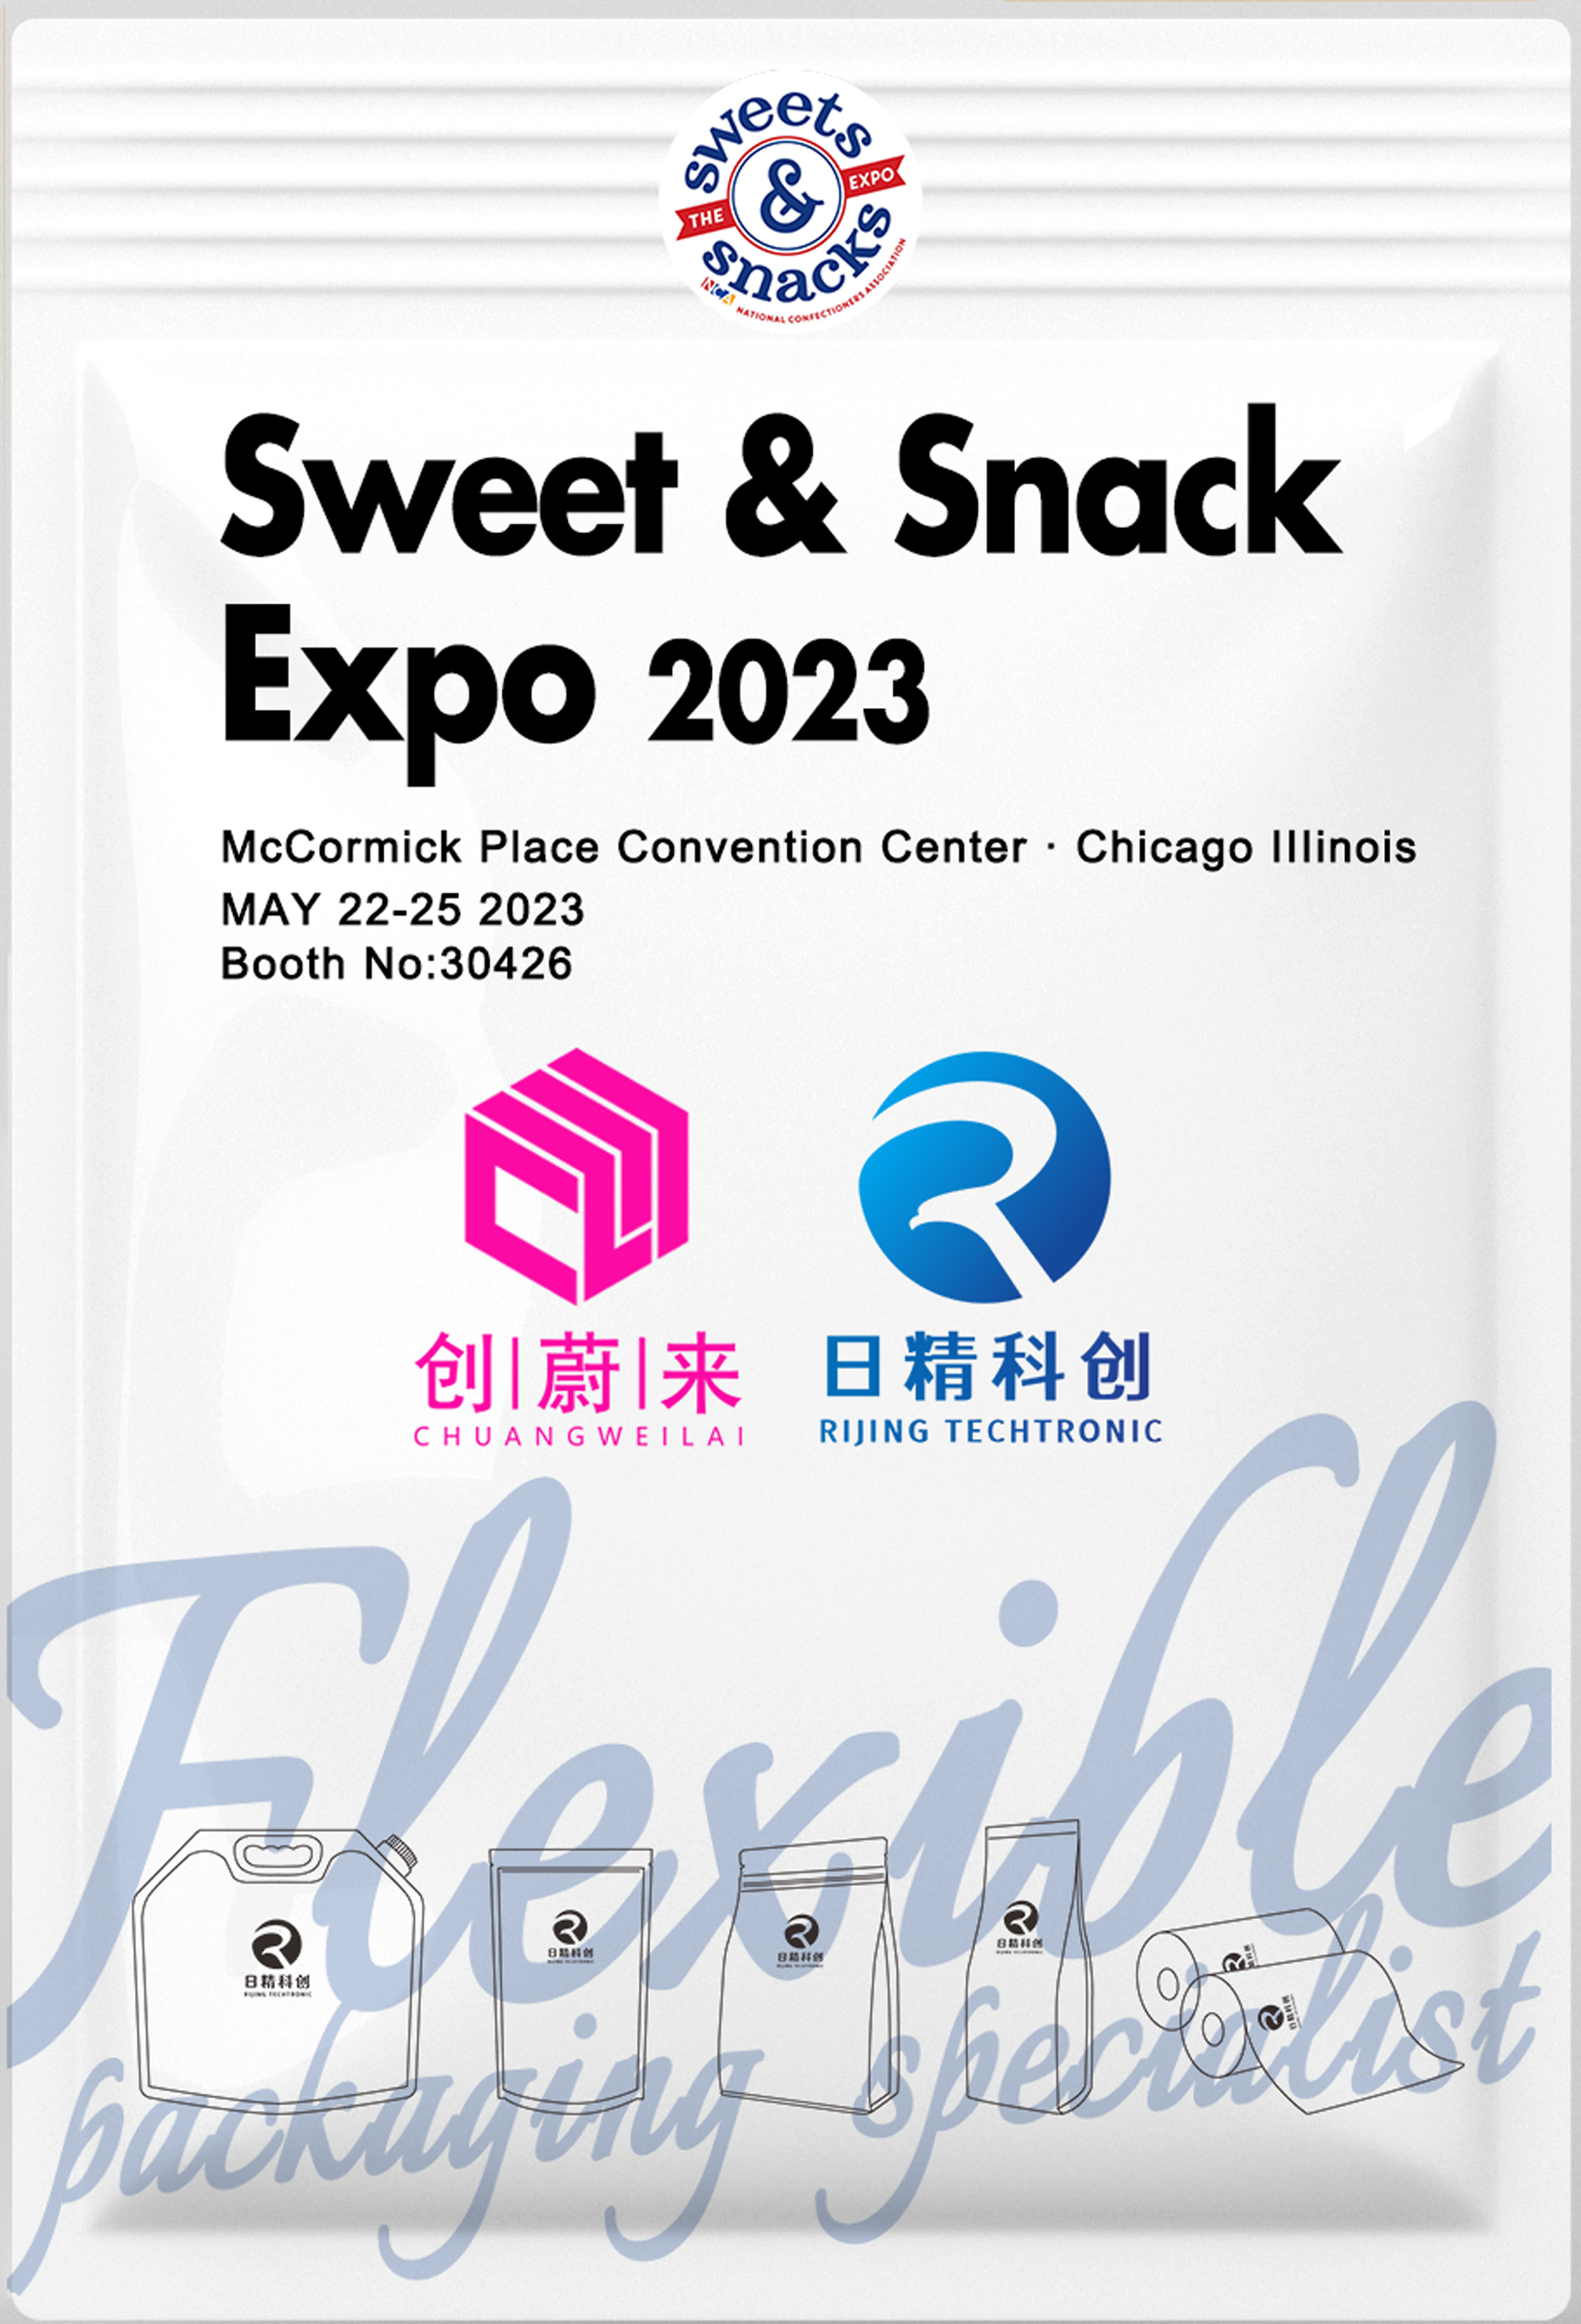 Welcome to visit Chicago Sweet & Snack Expo